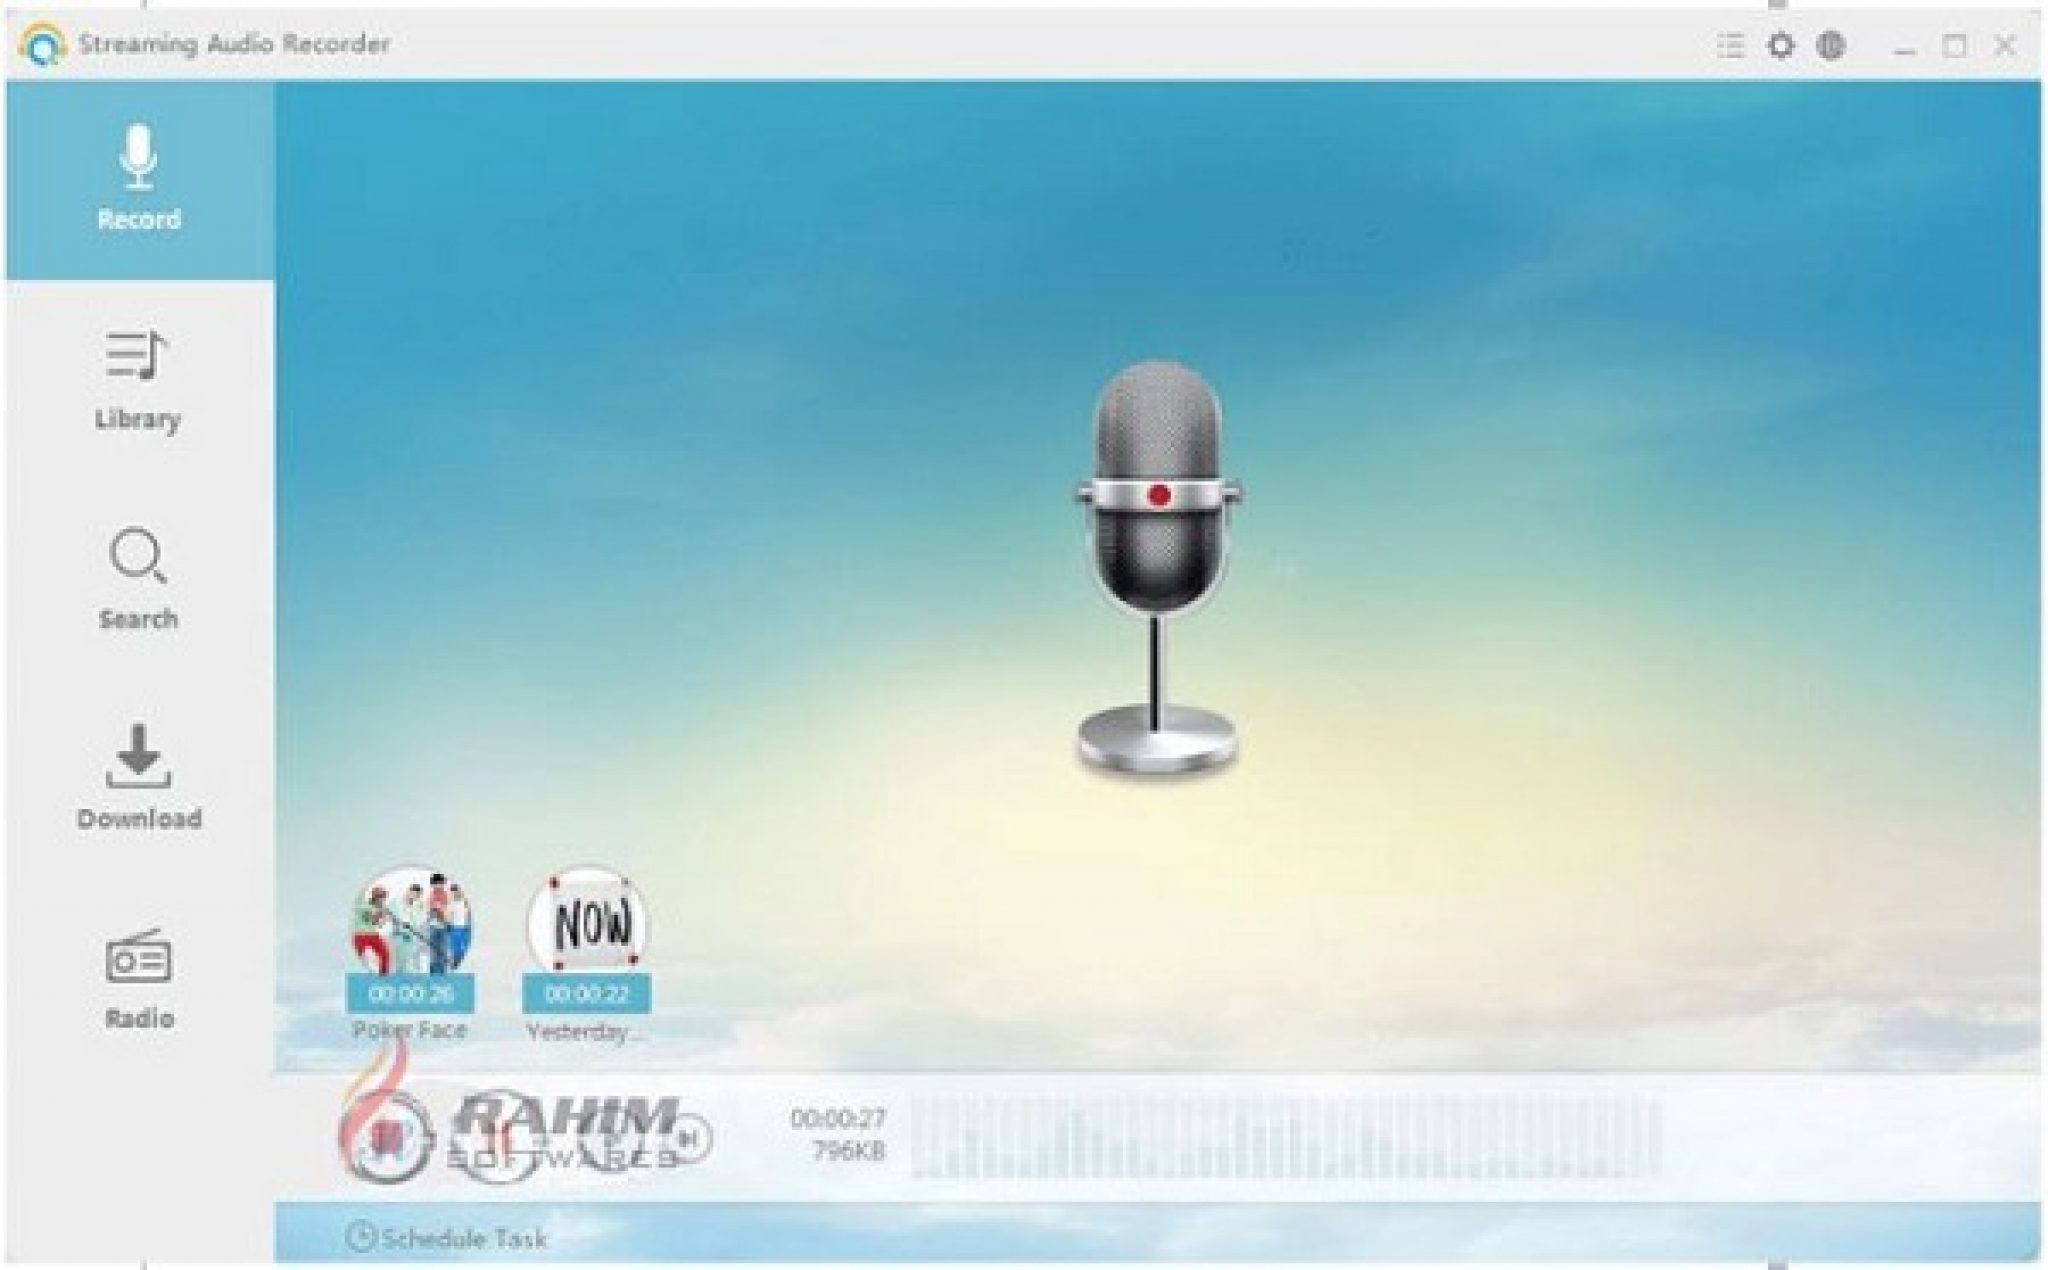 Abyssmedia i-Sound Recorder for Windows 7.9.4.3 instal the new version for apple